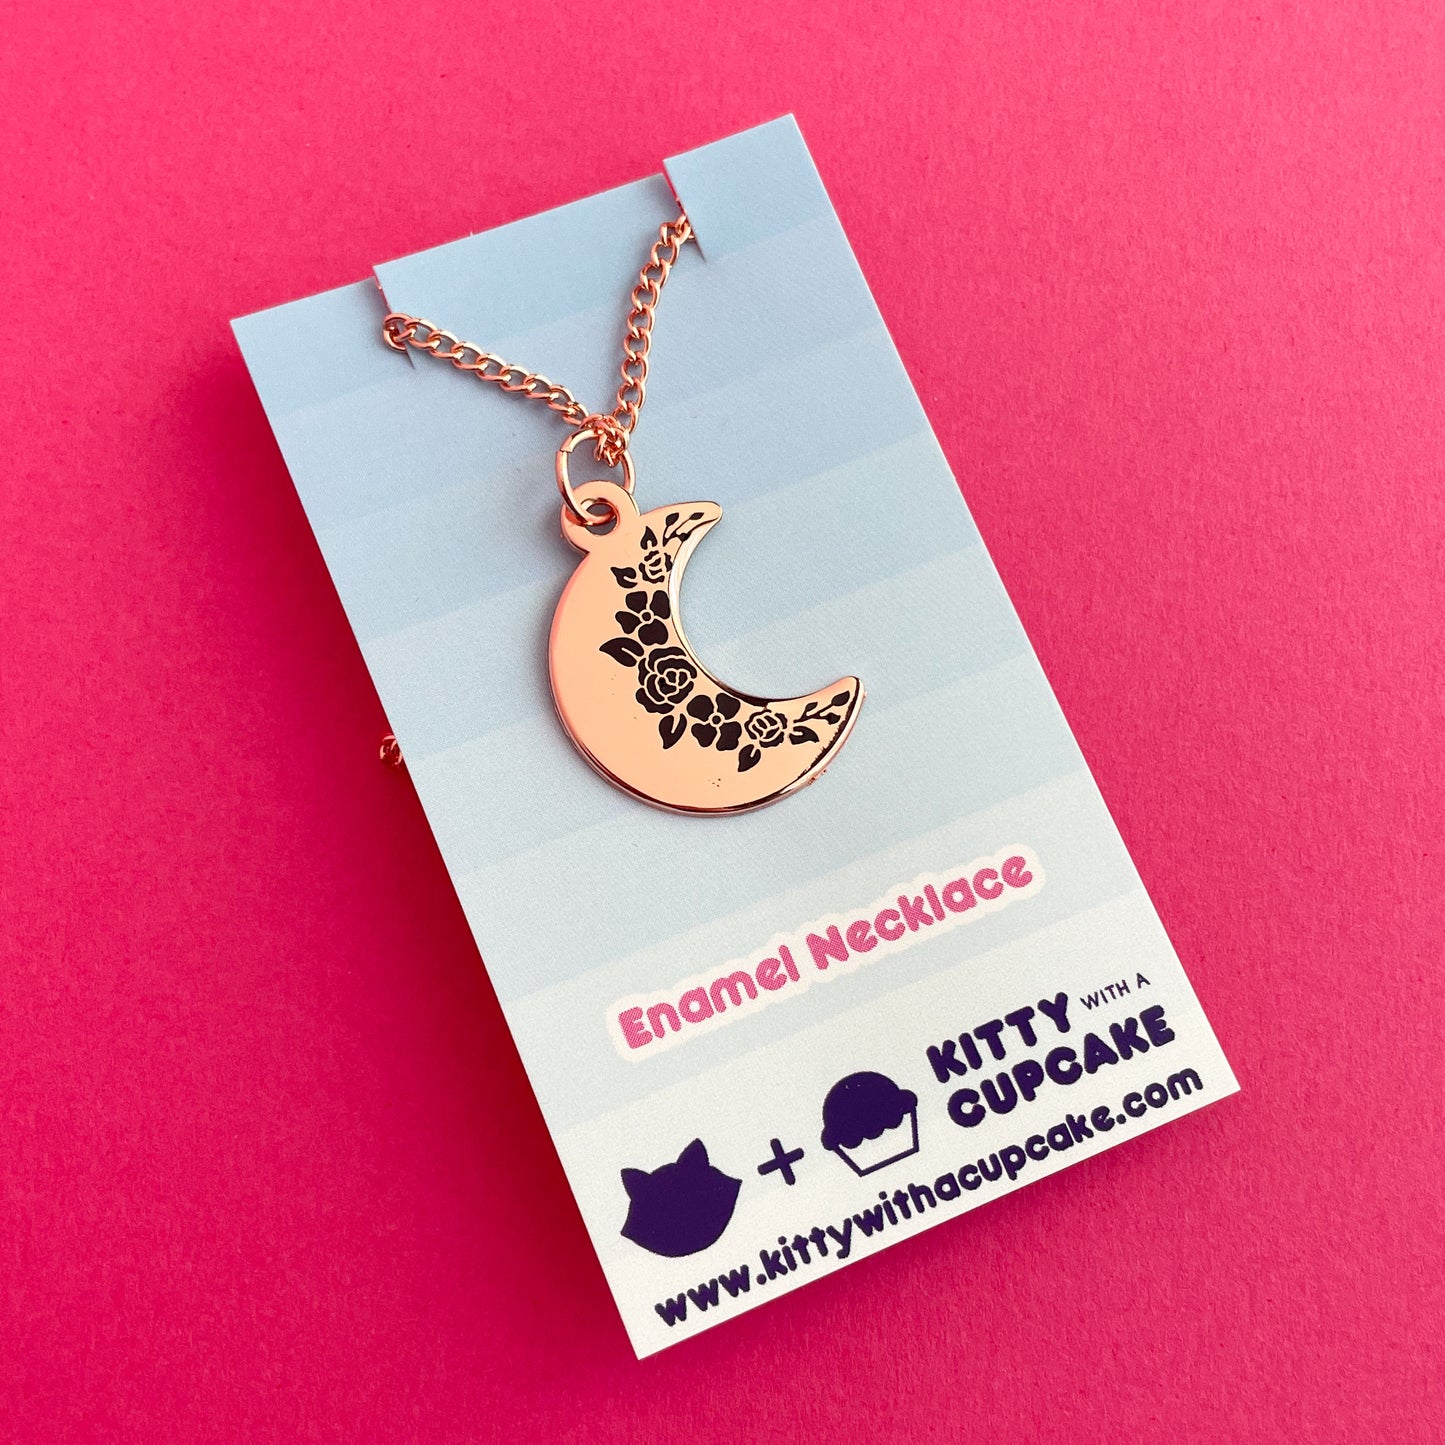 A crescent moon pendanct with black floral silhouettes along the inside edge. It has a copper colored chain and is packaged on a blue gradient card. 